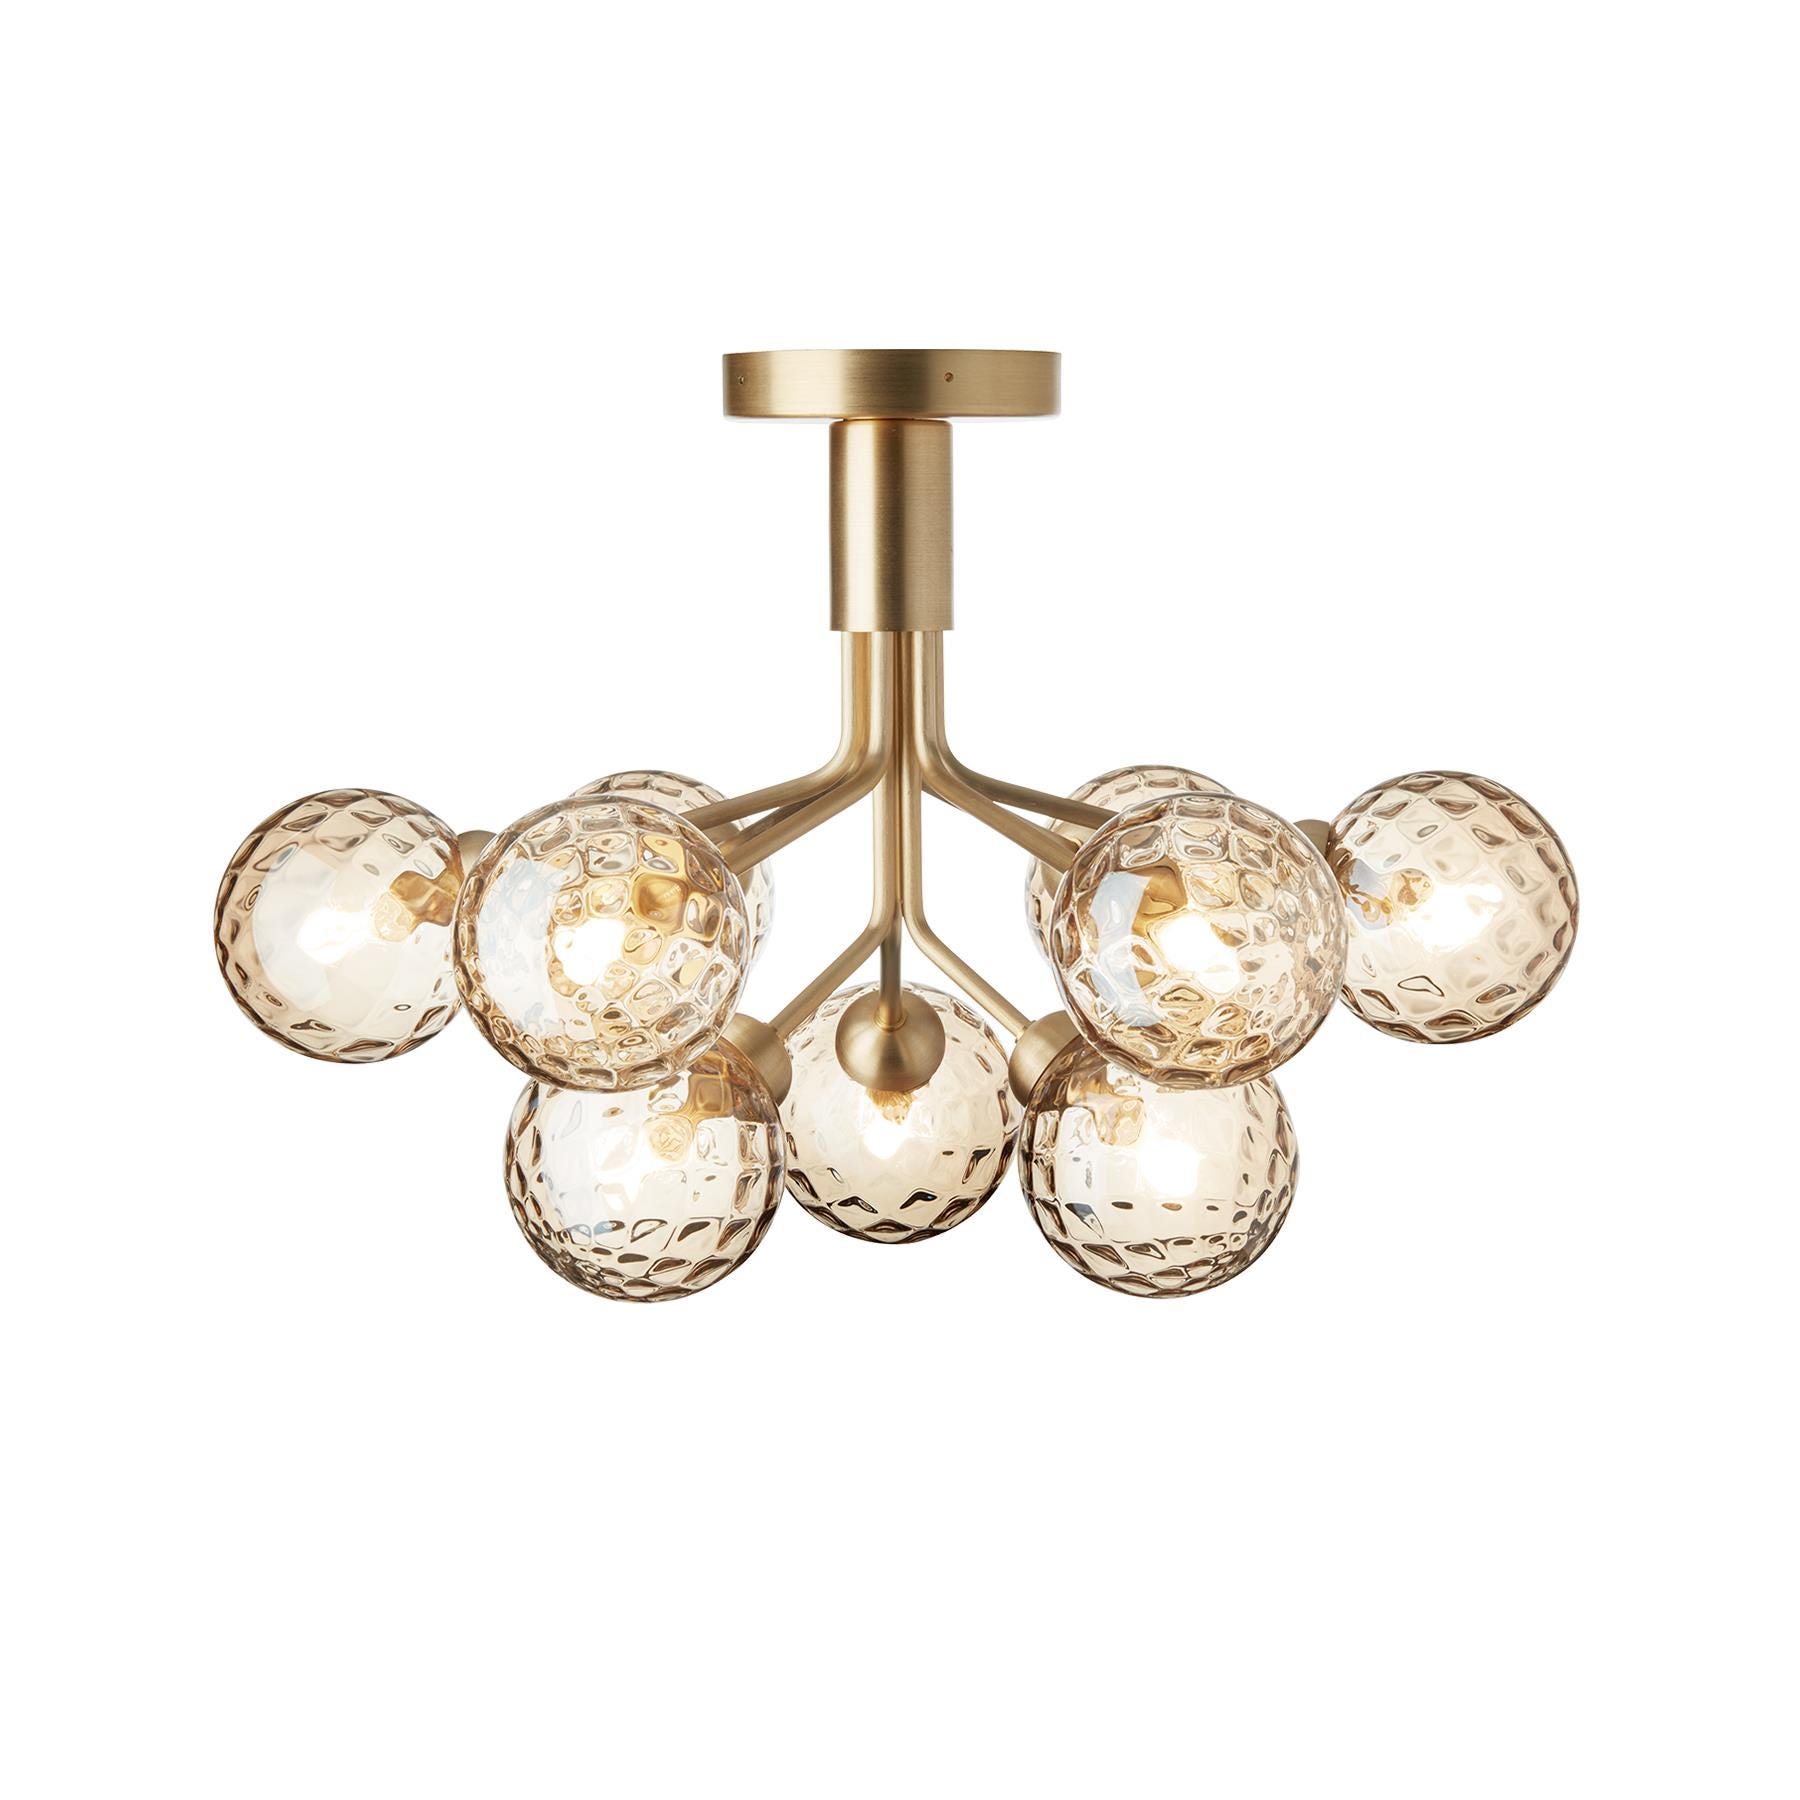 Nuura Apiales 9 Ceiling Light Brushed Brass Optic Gold Brassgold